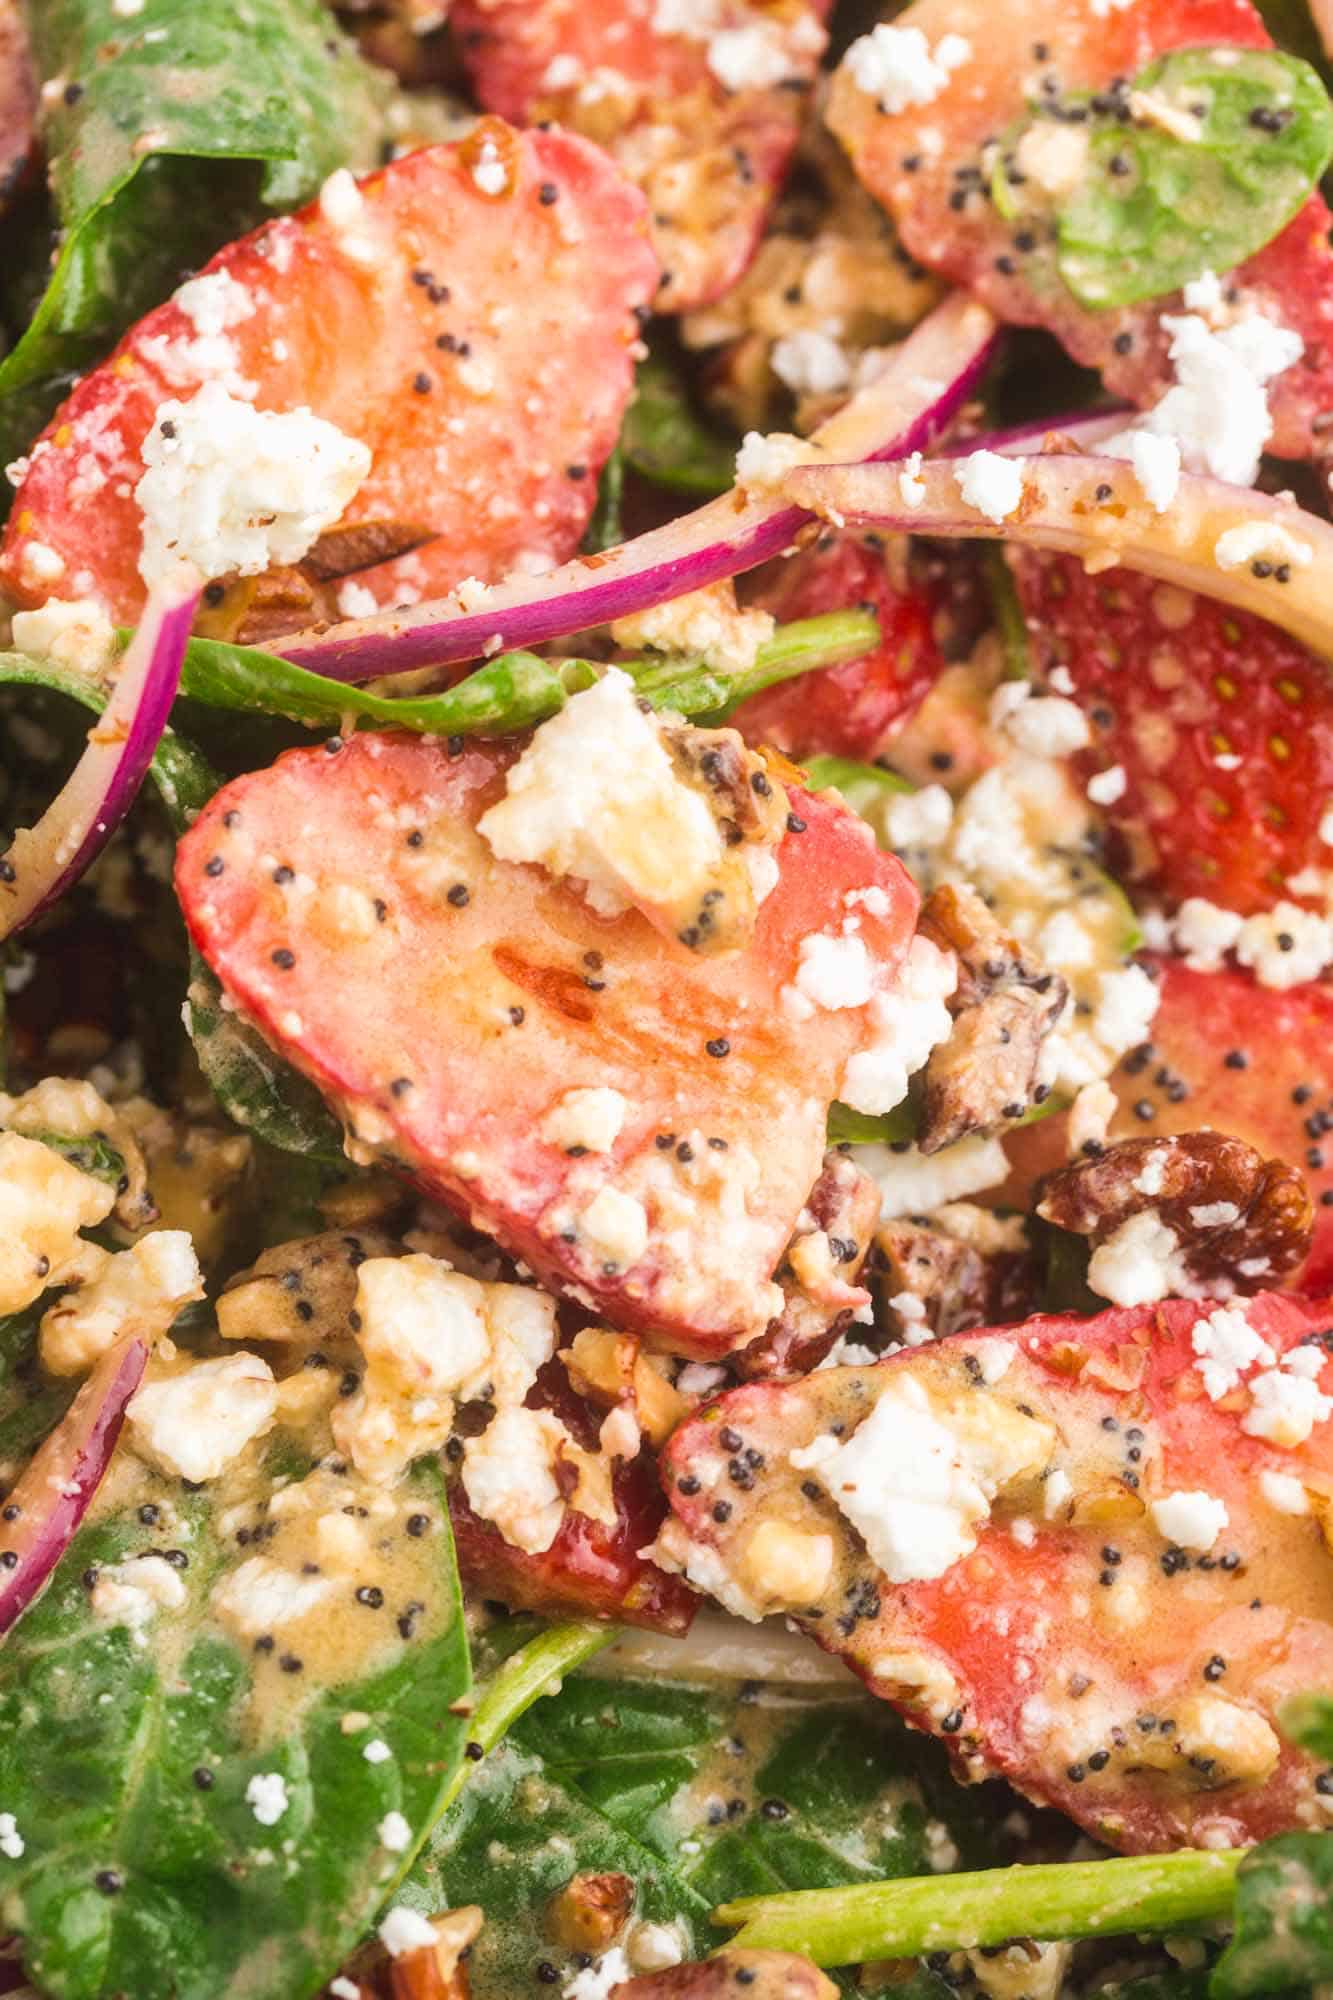 closeup view of a spinach salad with strawberries and poppyseed dressing, feta cheese